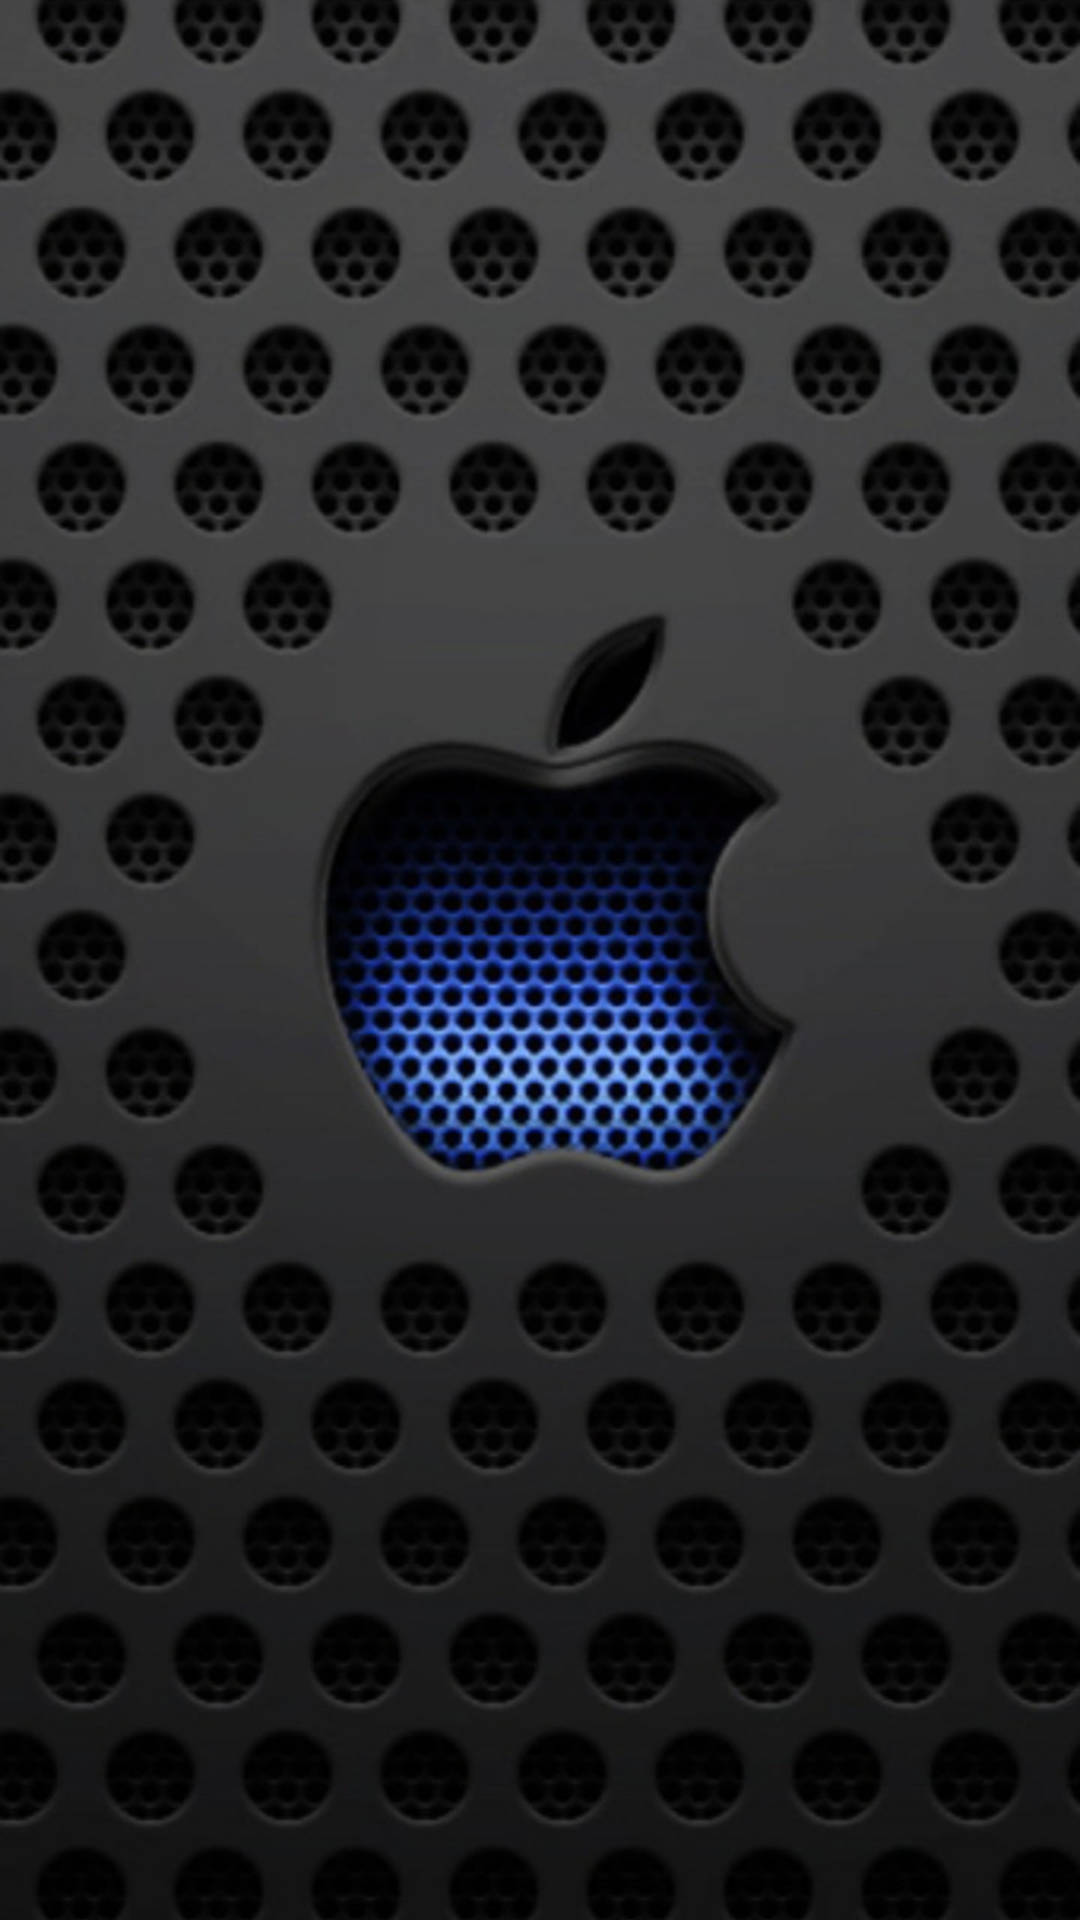 Full Hd Apple On Perforated Black Picture